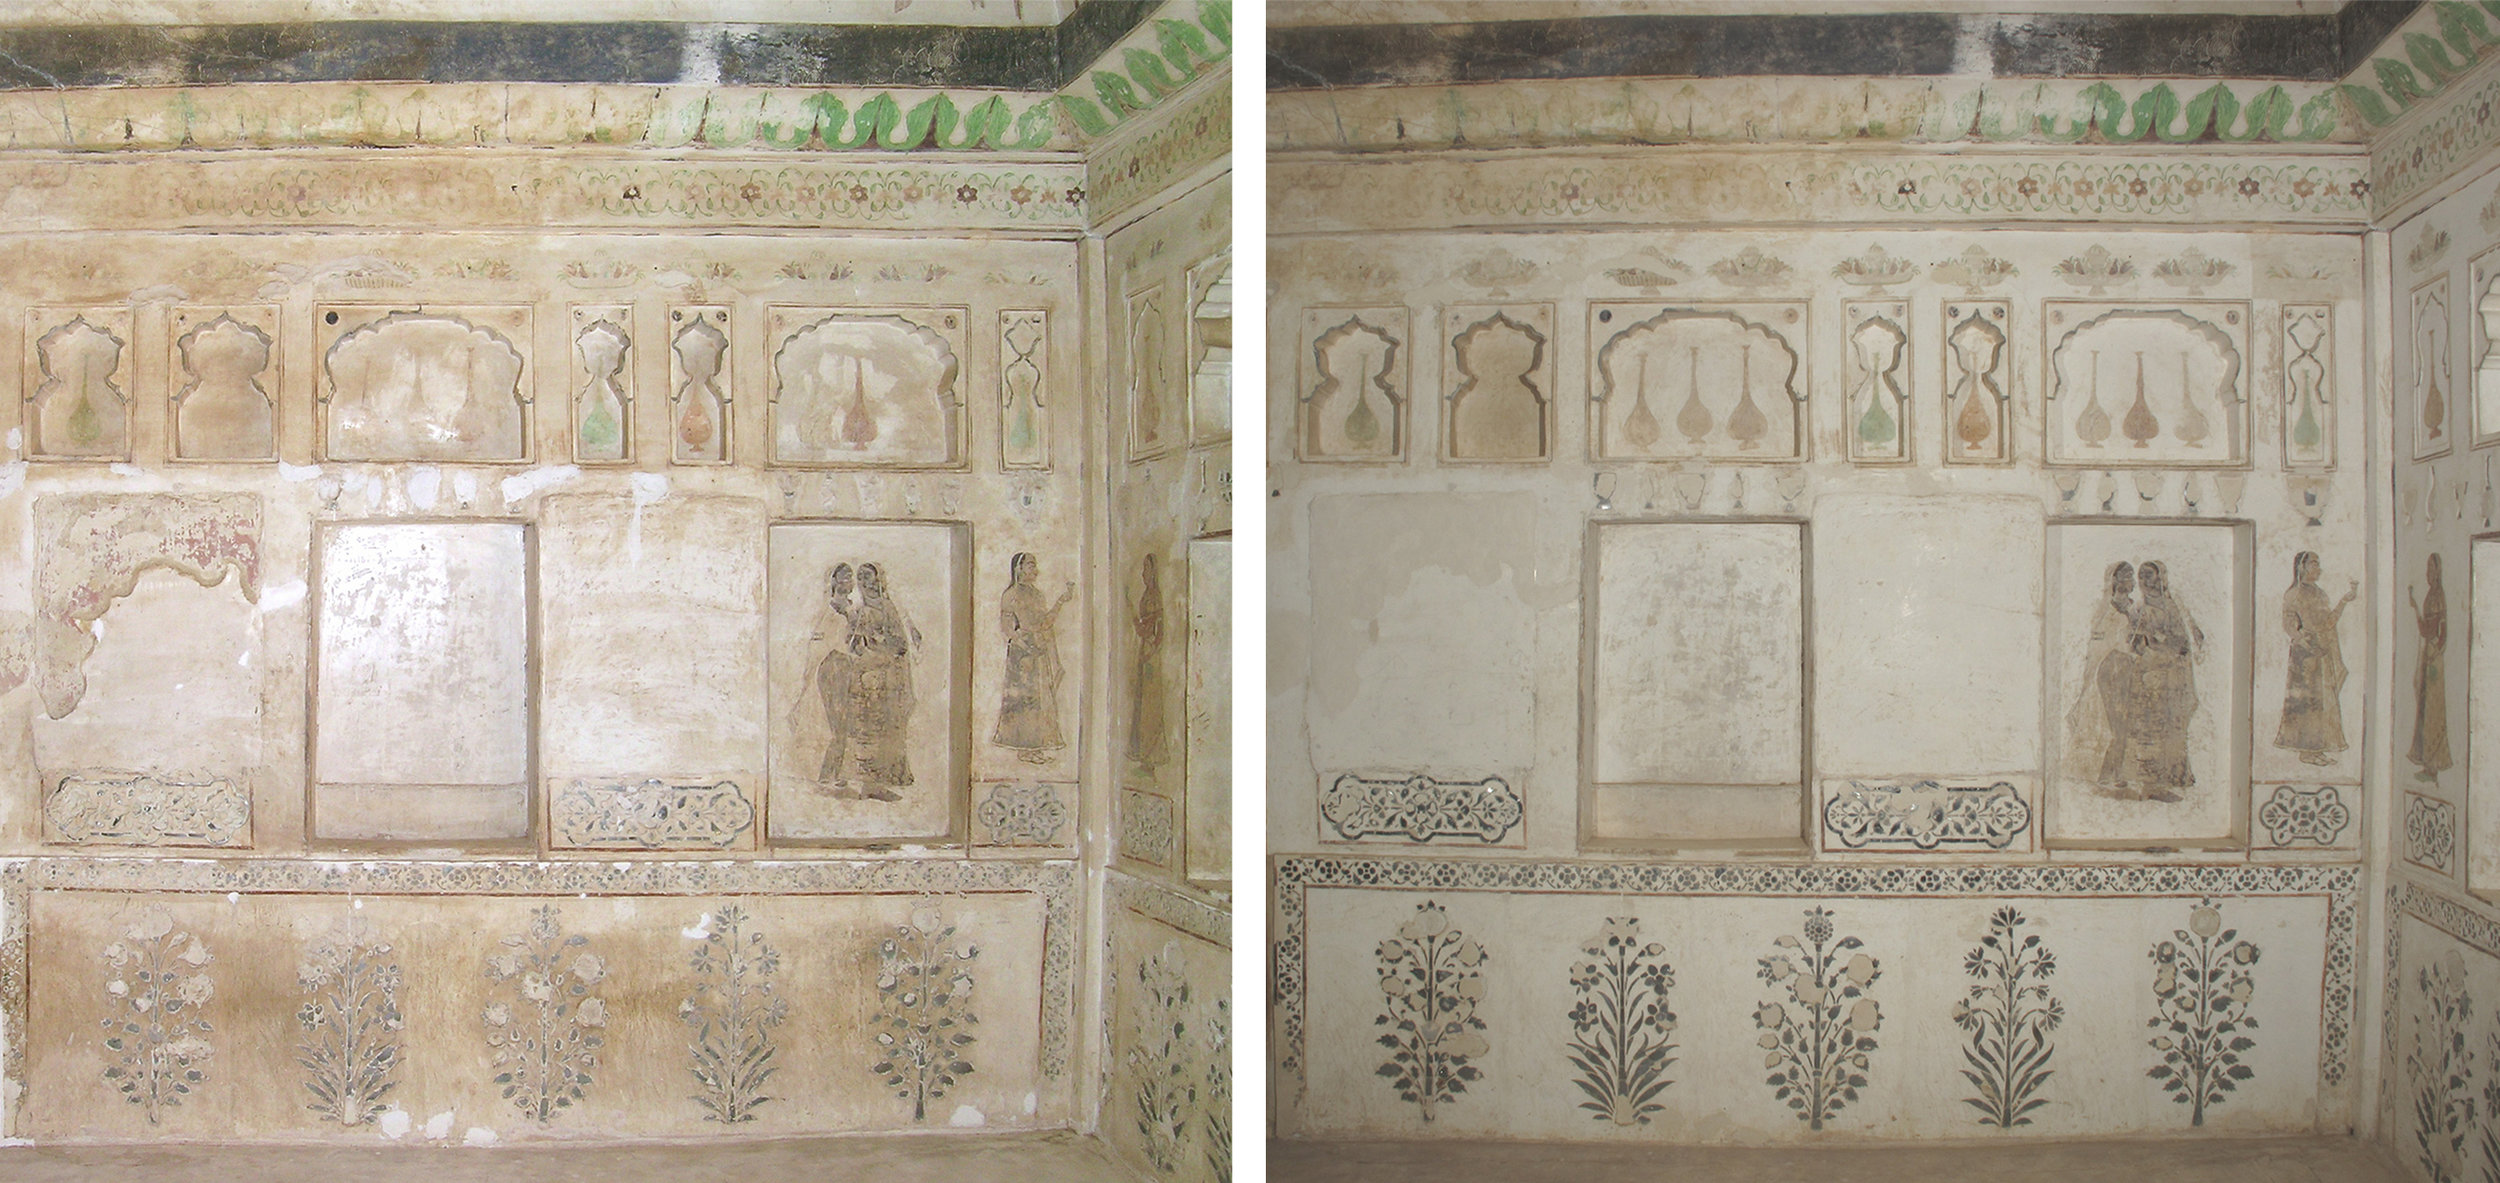  Detail of the south wall before (left) and after (right) completion of conservation treatment.  Image © Courtauld CWPD 